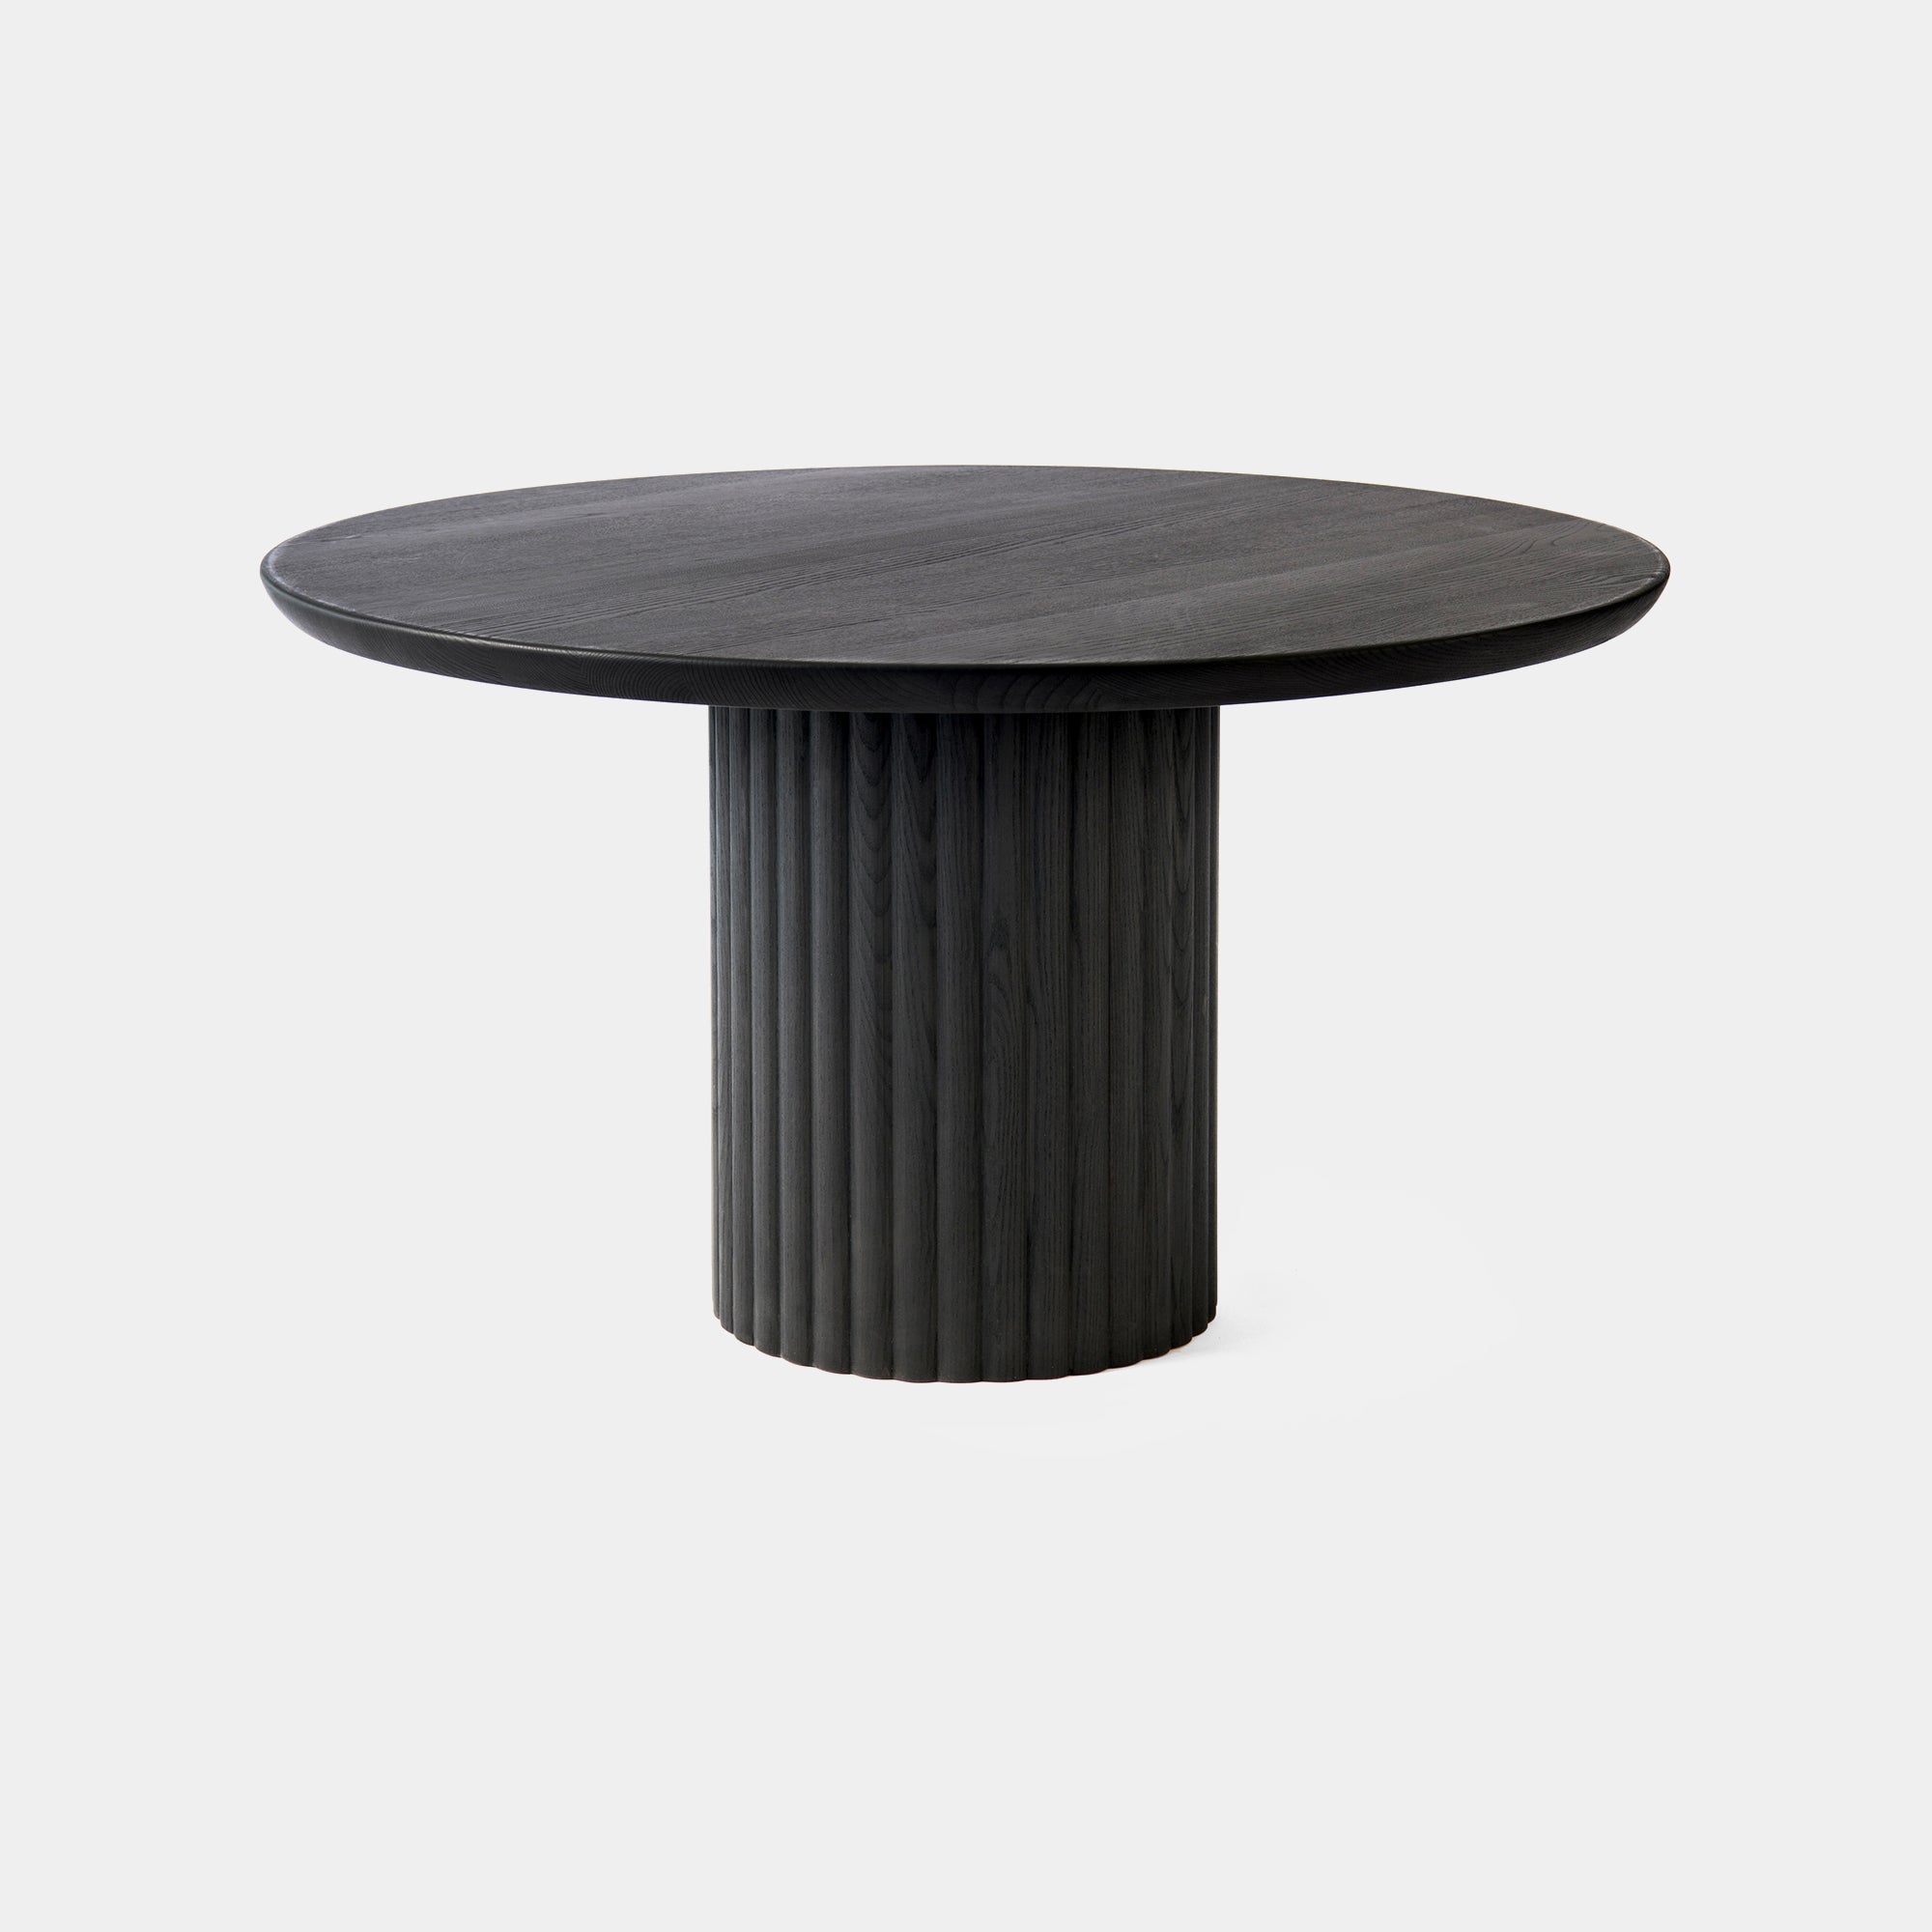 48cm Round Coffee Table With Ribbed Column Leg